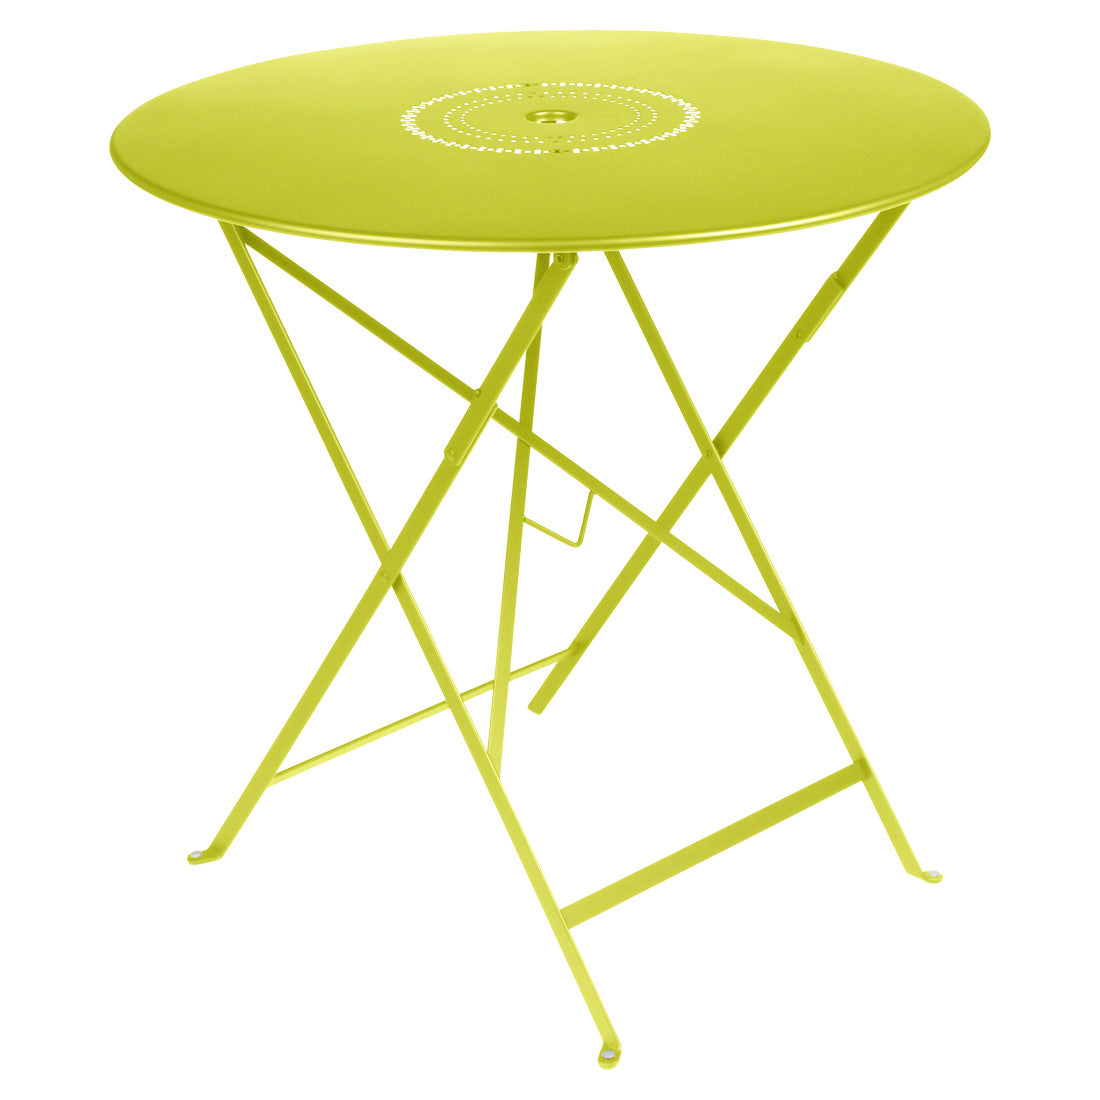 Fermob Floreal 30.5" Round Dining Table